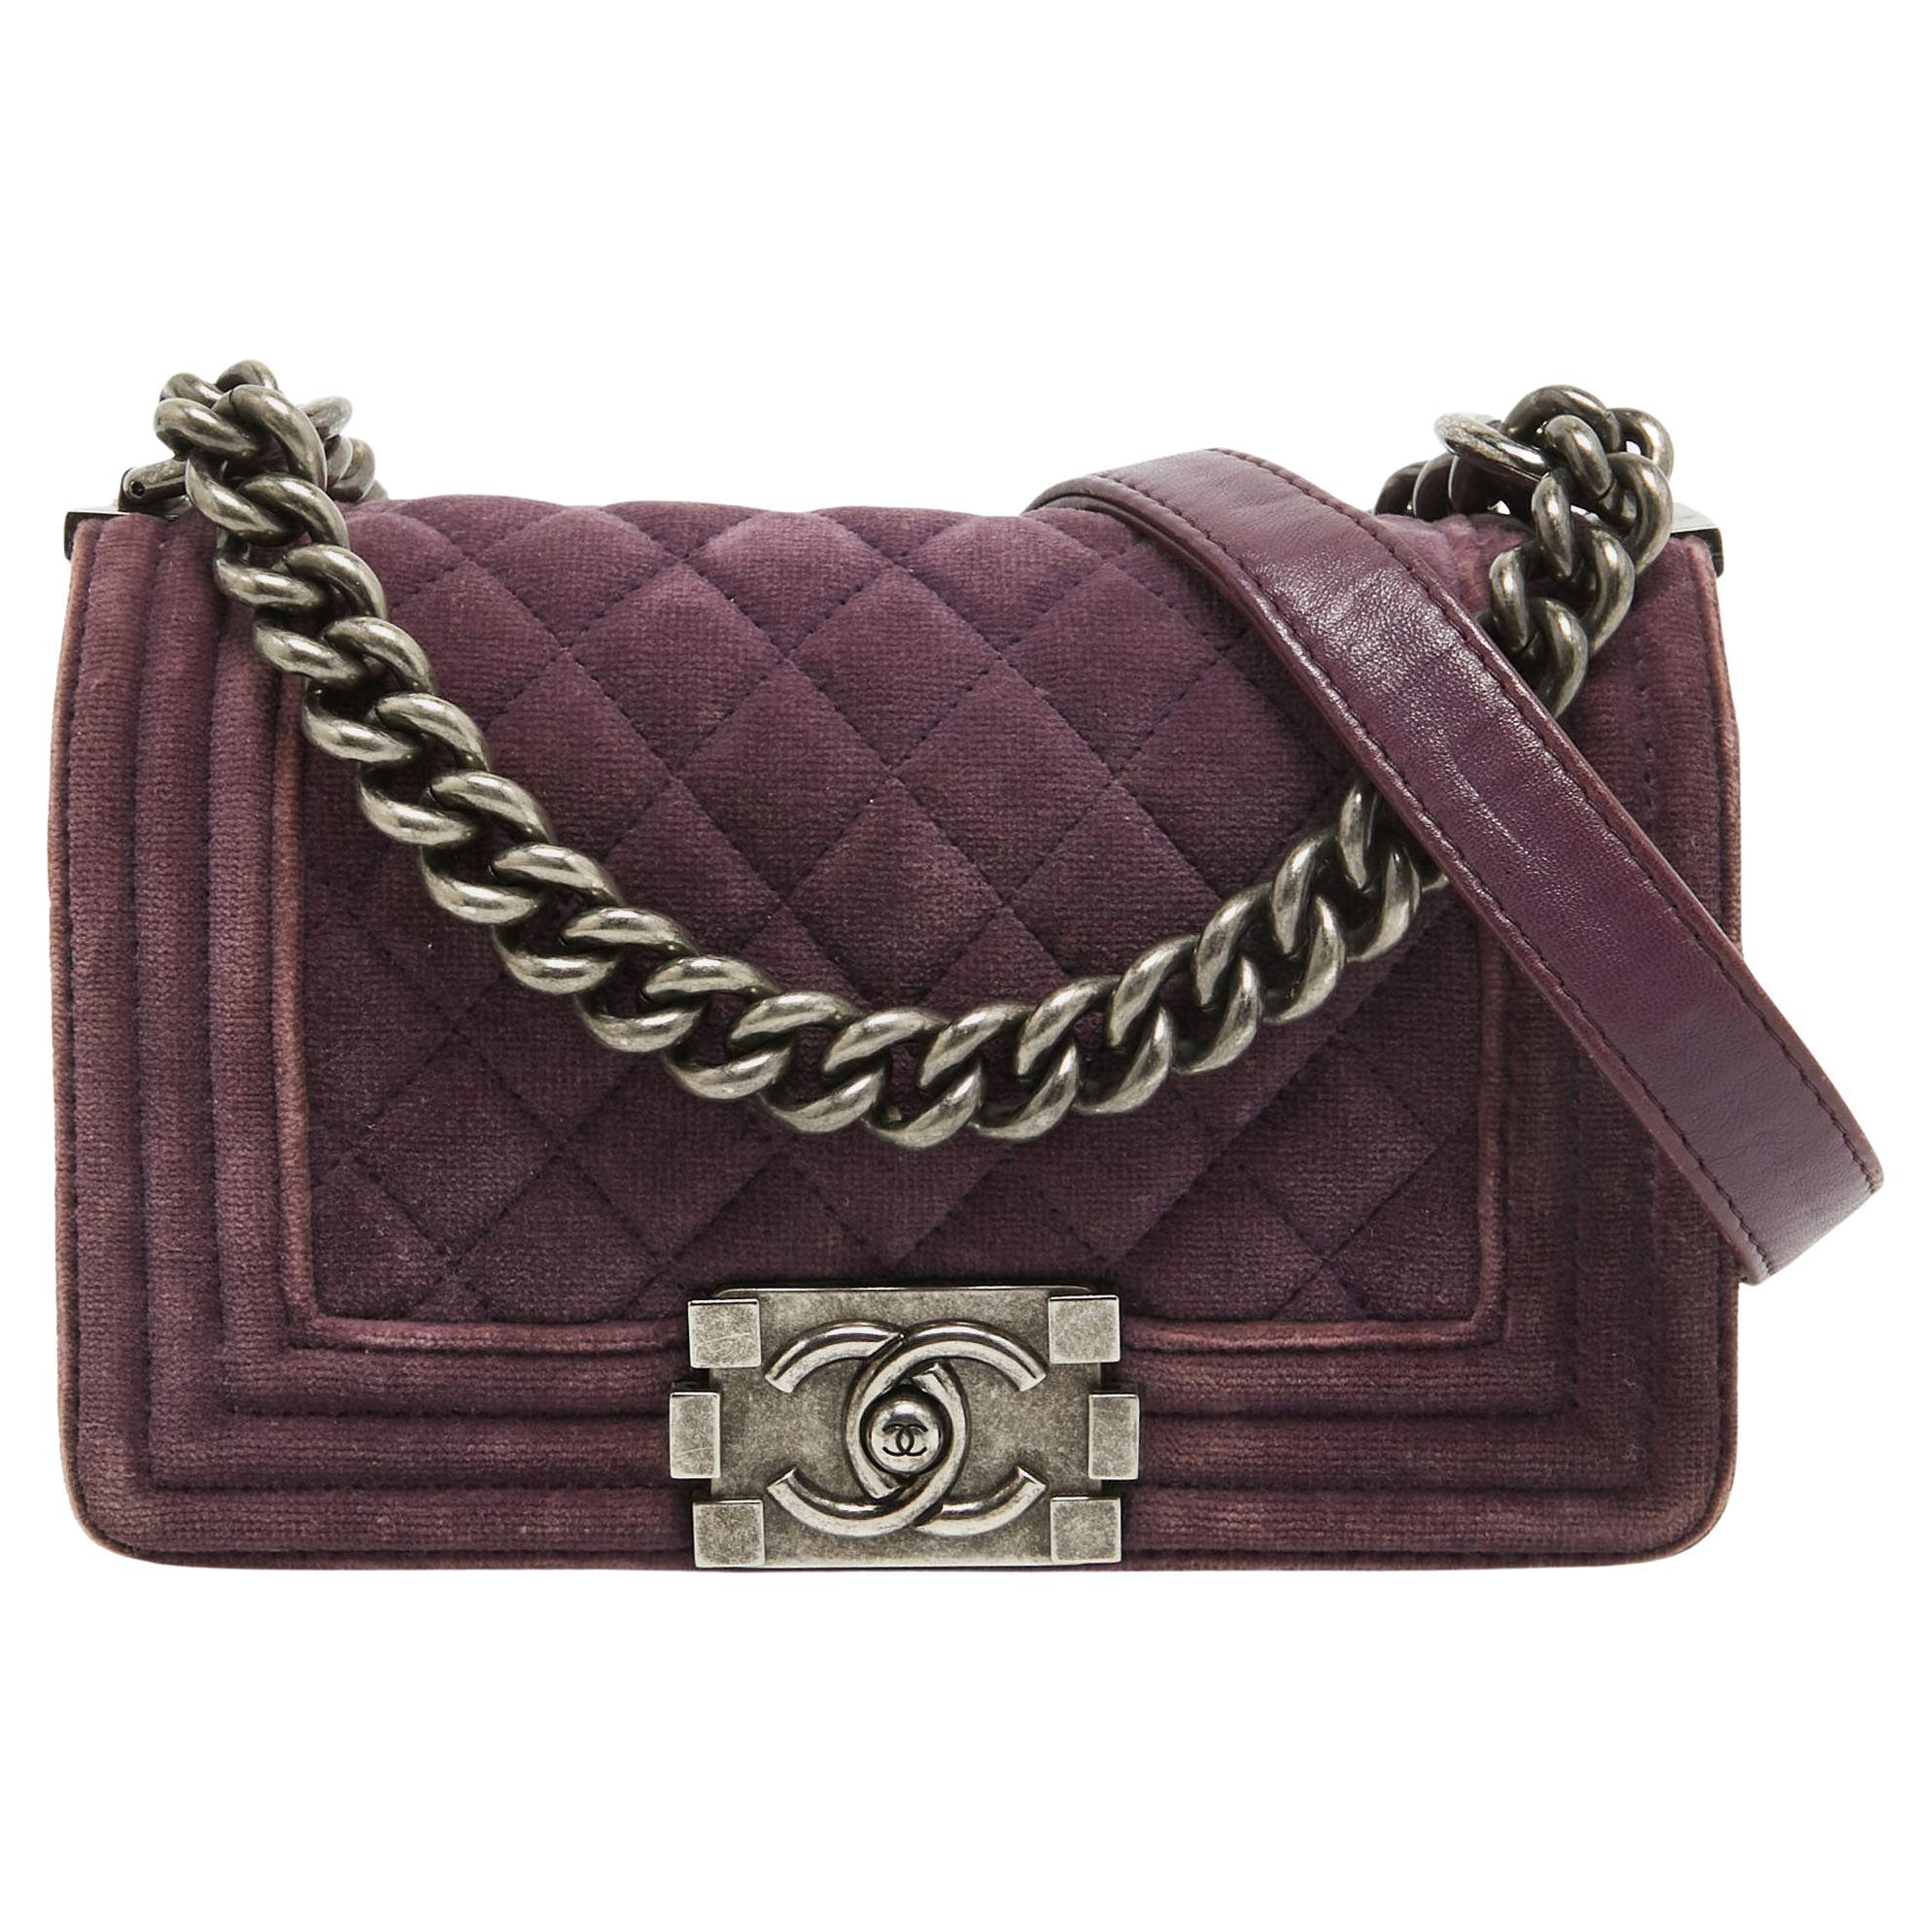 How much is a small Chanel Boy bag?